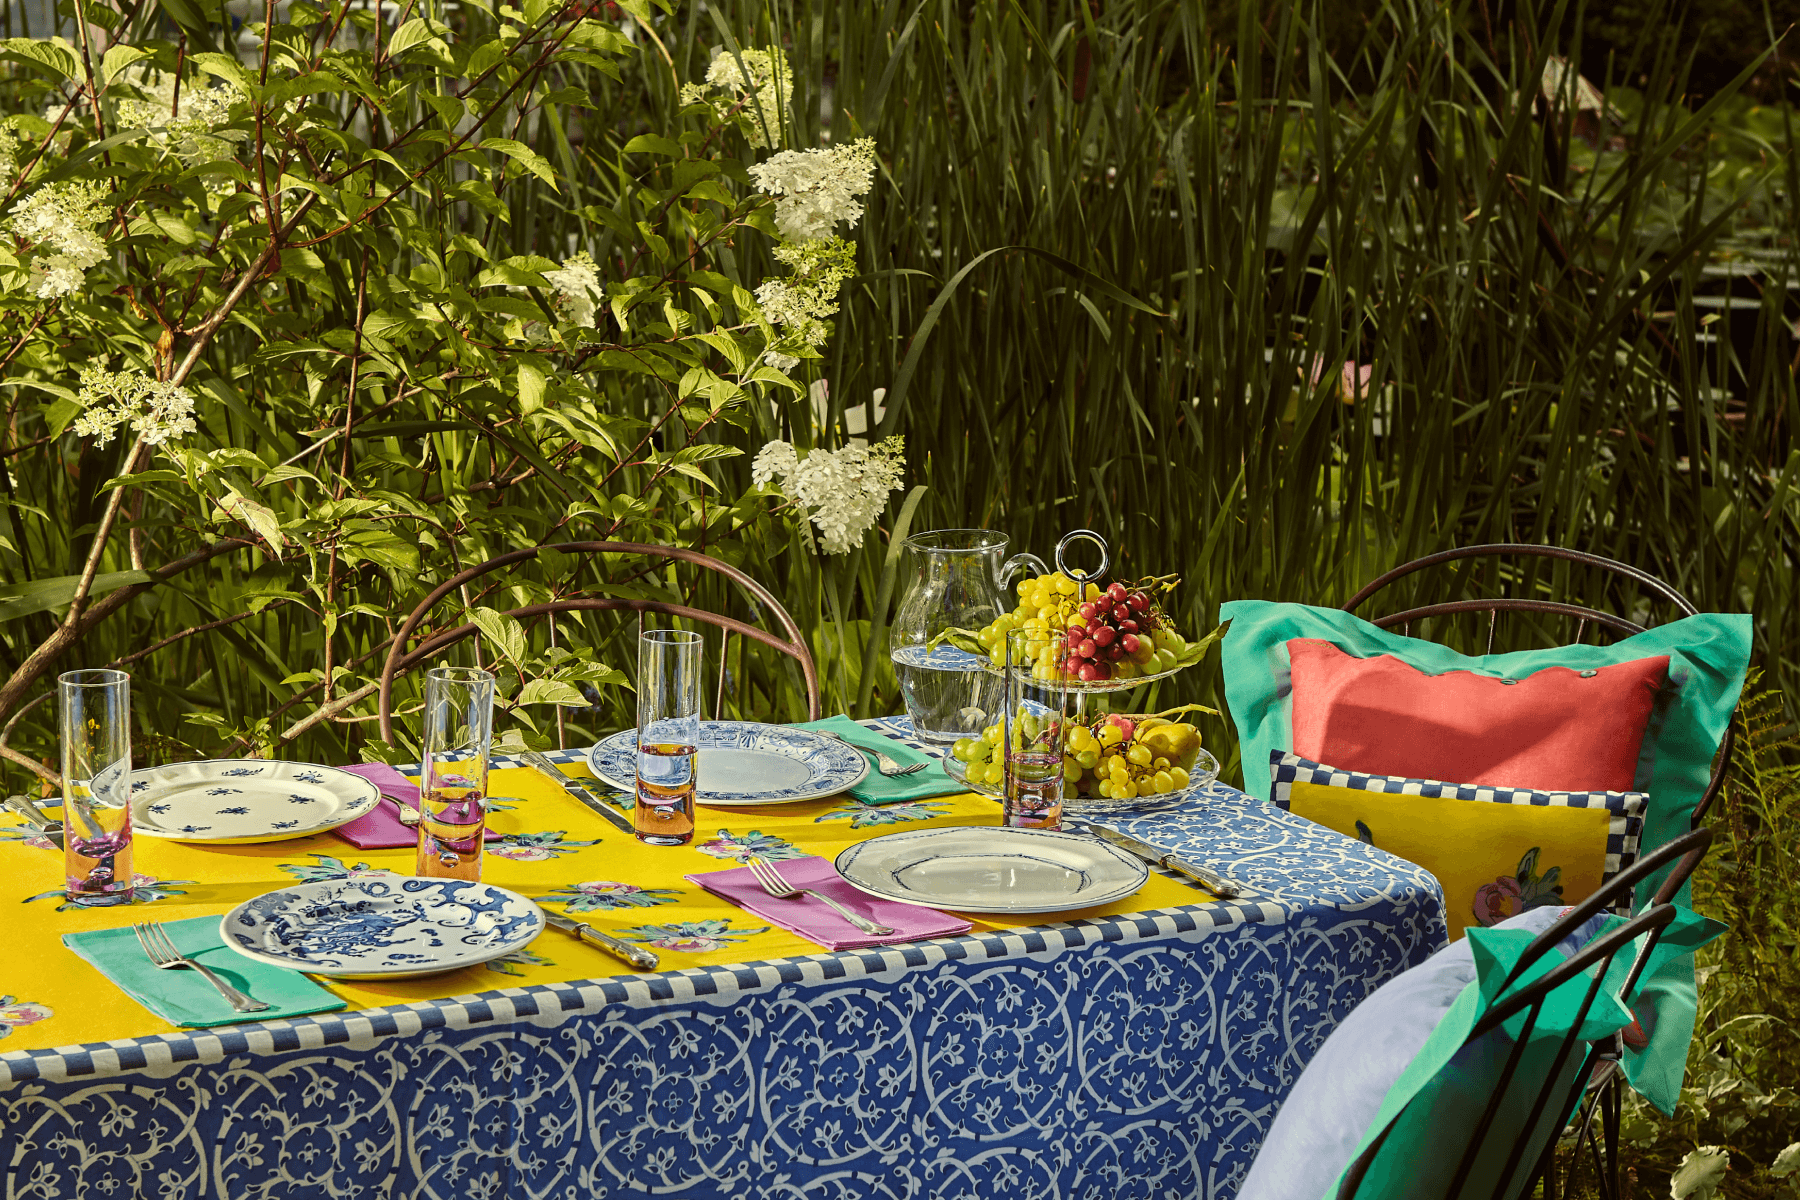 Outdoor table set with a vibrant yellow and blue tablecloth from textile designer Lisa Corti.